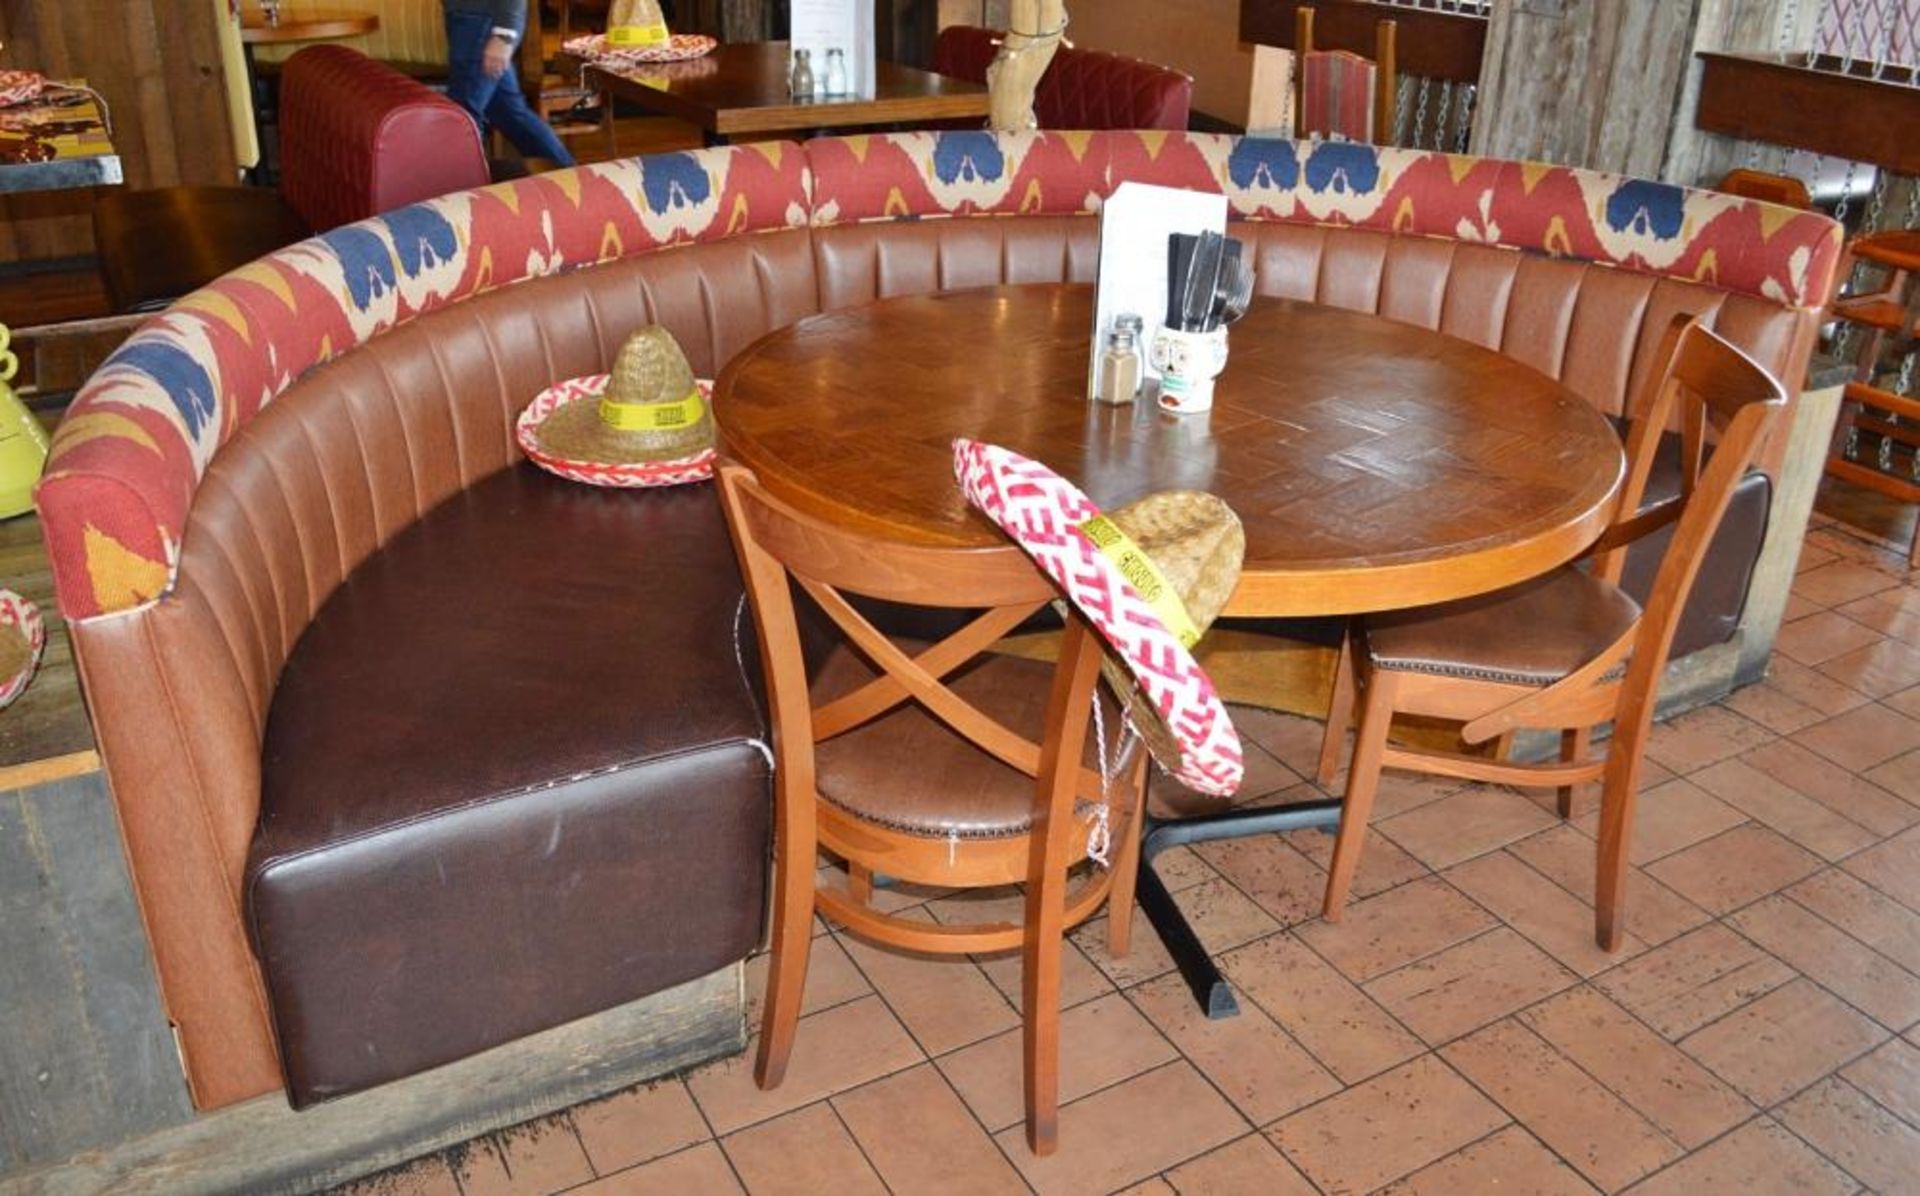 2 x Half Circle Seating Booths / Banquet Seating - Faux Leather Brown Seating With Yellow and Brown - Image 10 of 13